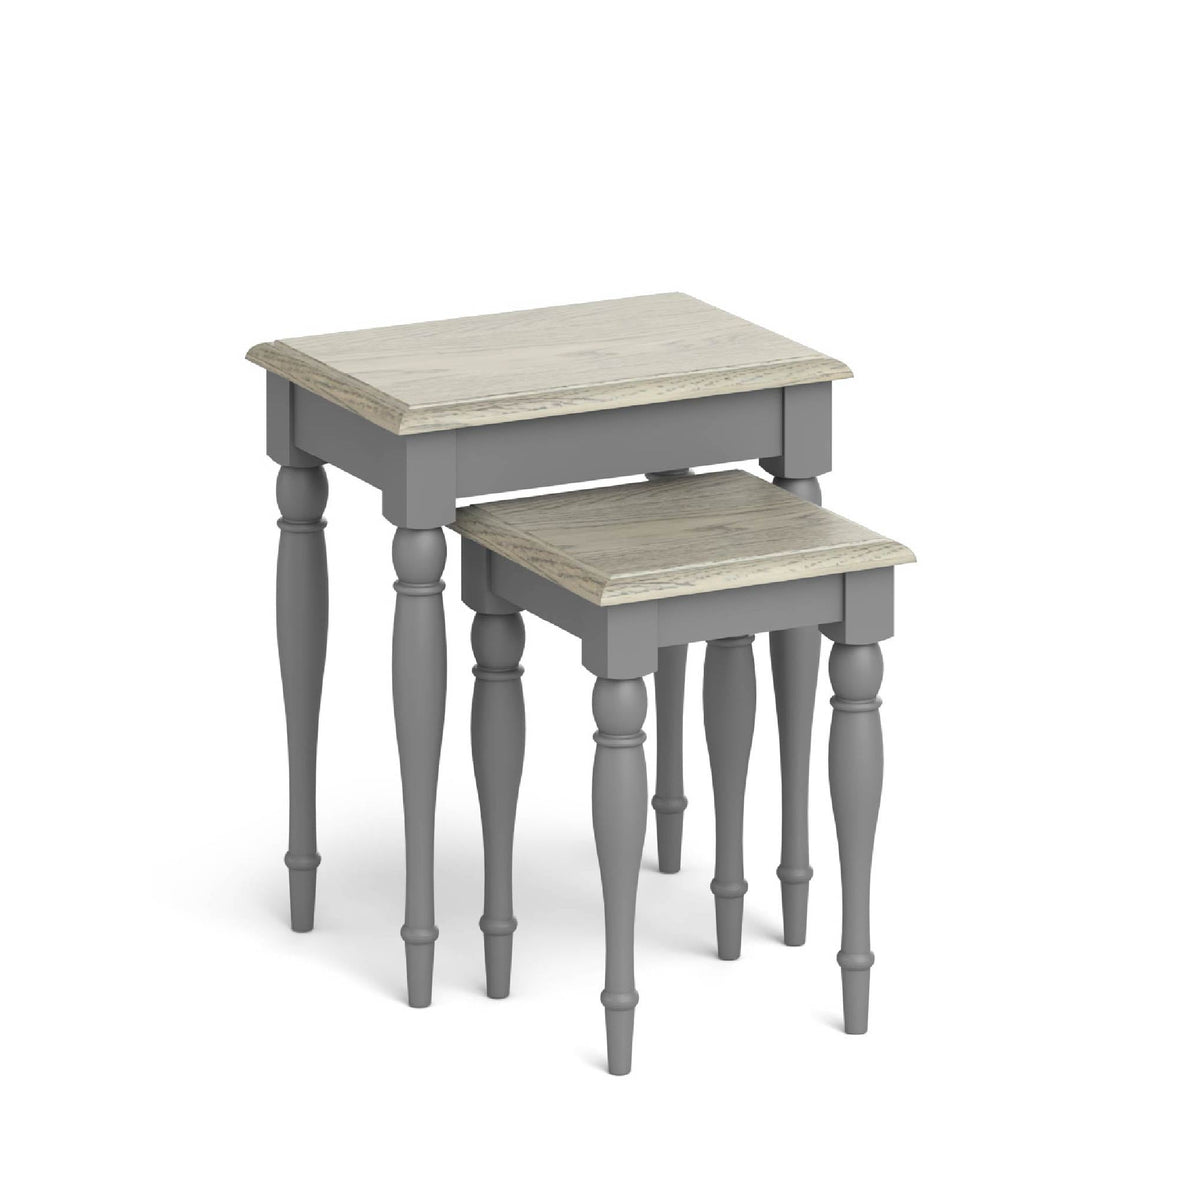 The Mulsanne Grey French Style Nest of Tables with Oak Tops from Roseland Furniture